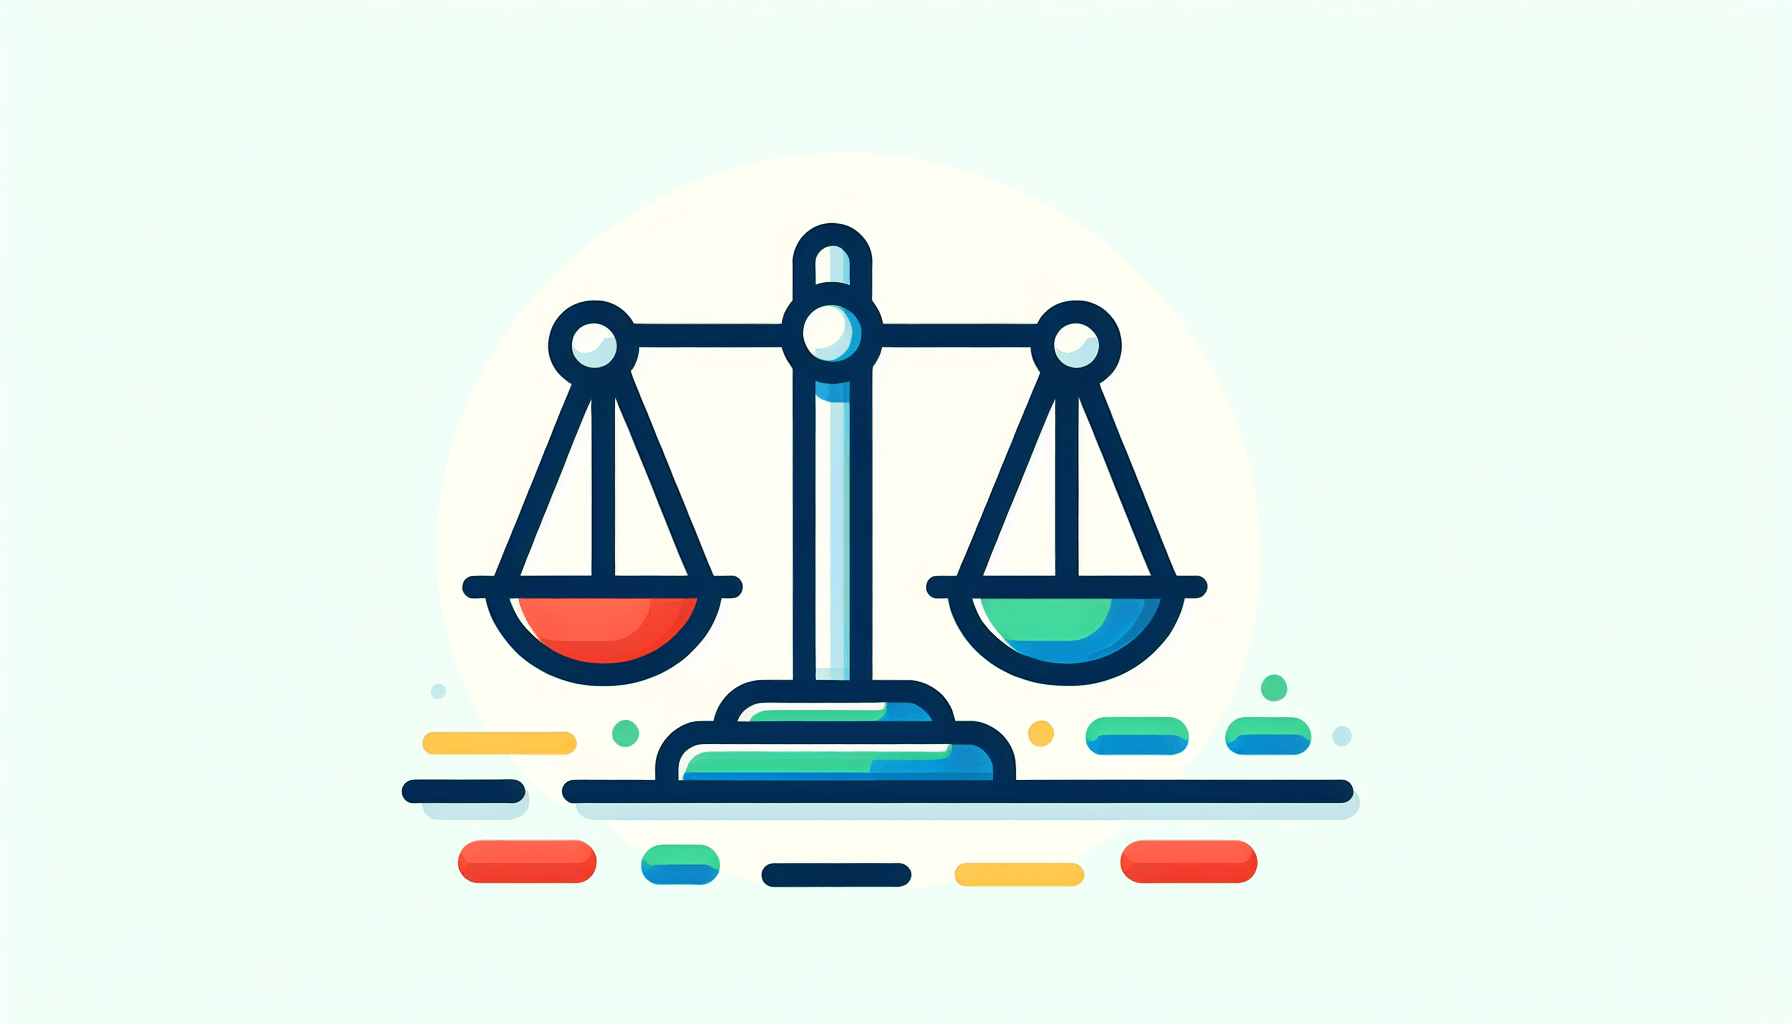 Balance scale in flat illustration style and white background, red #f47574, green #88c7a8, yellow #fcc44b, and blue #645bc8 colors.